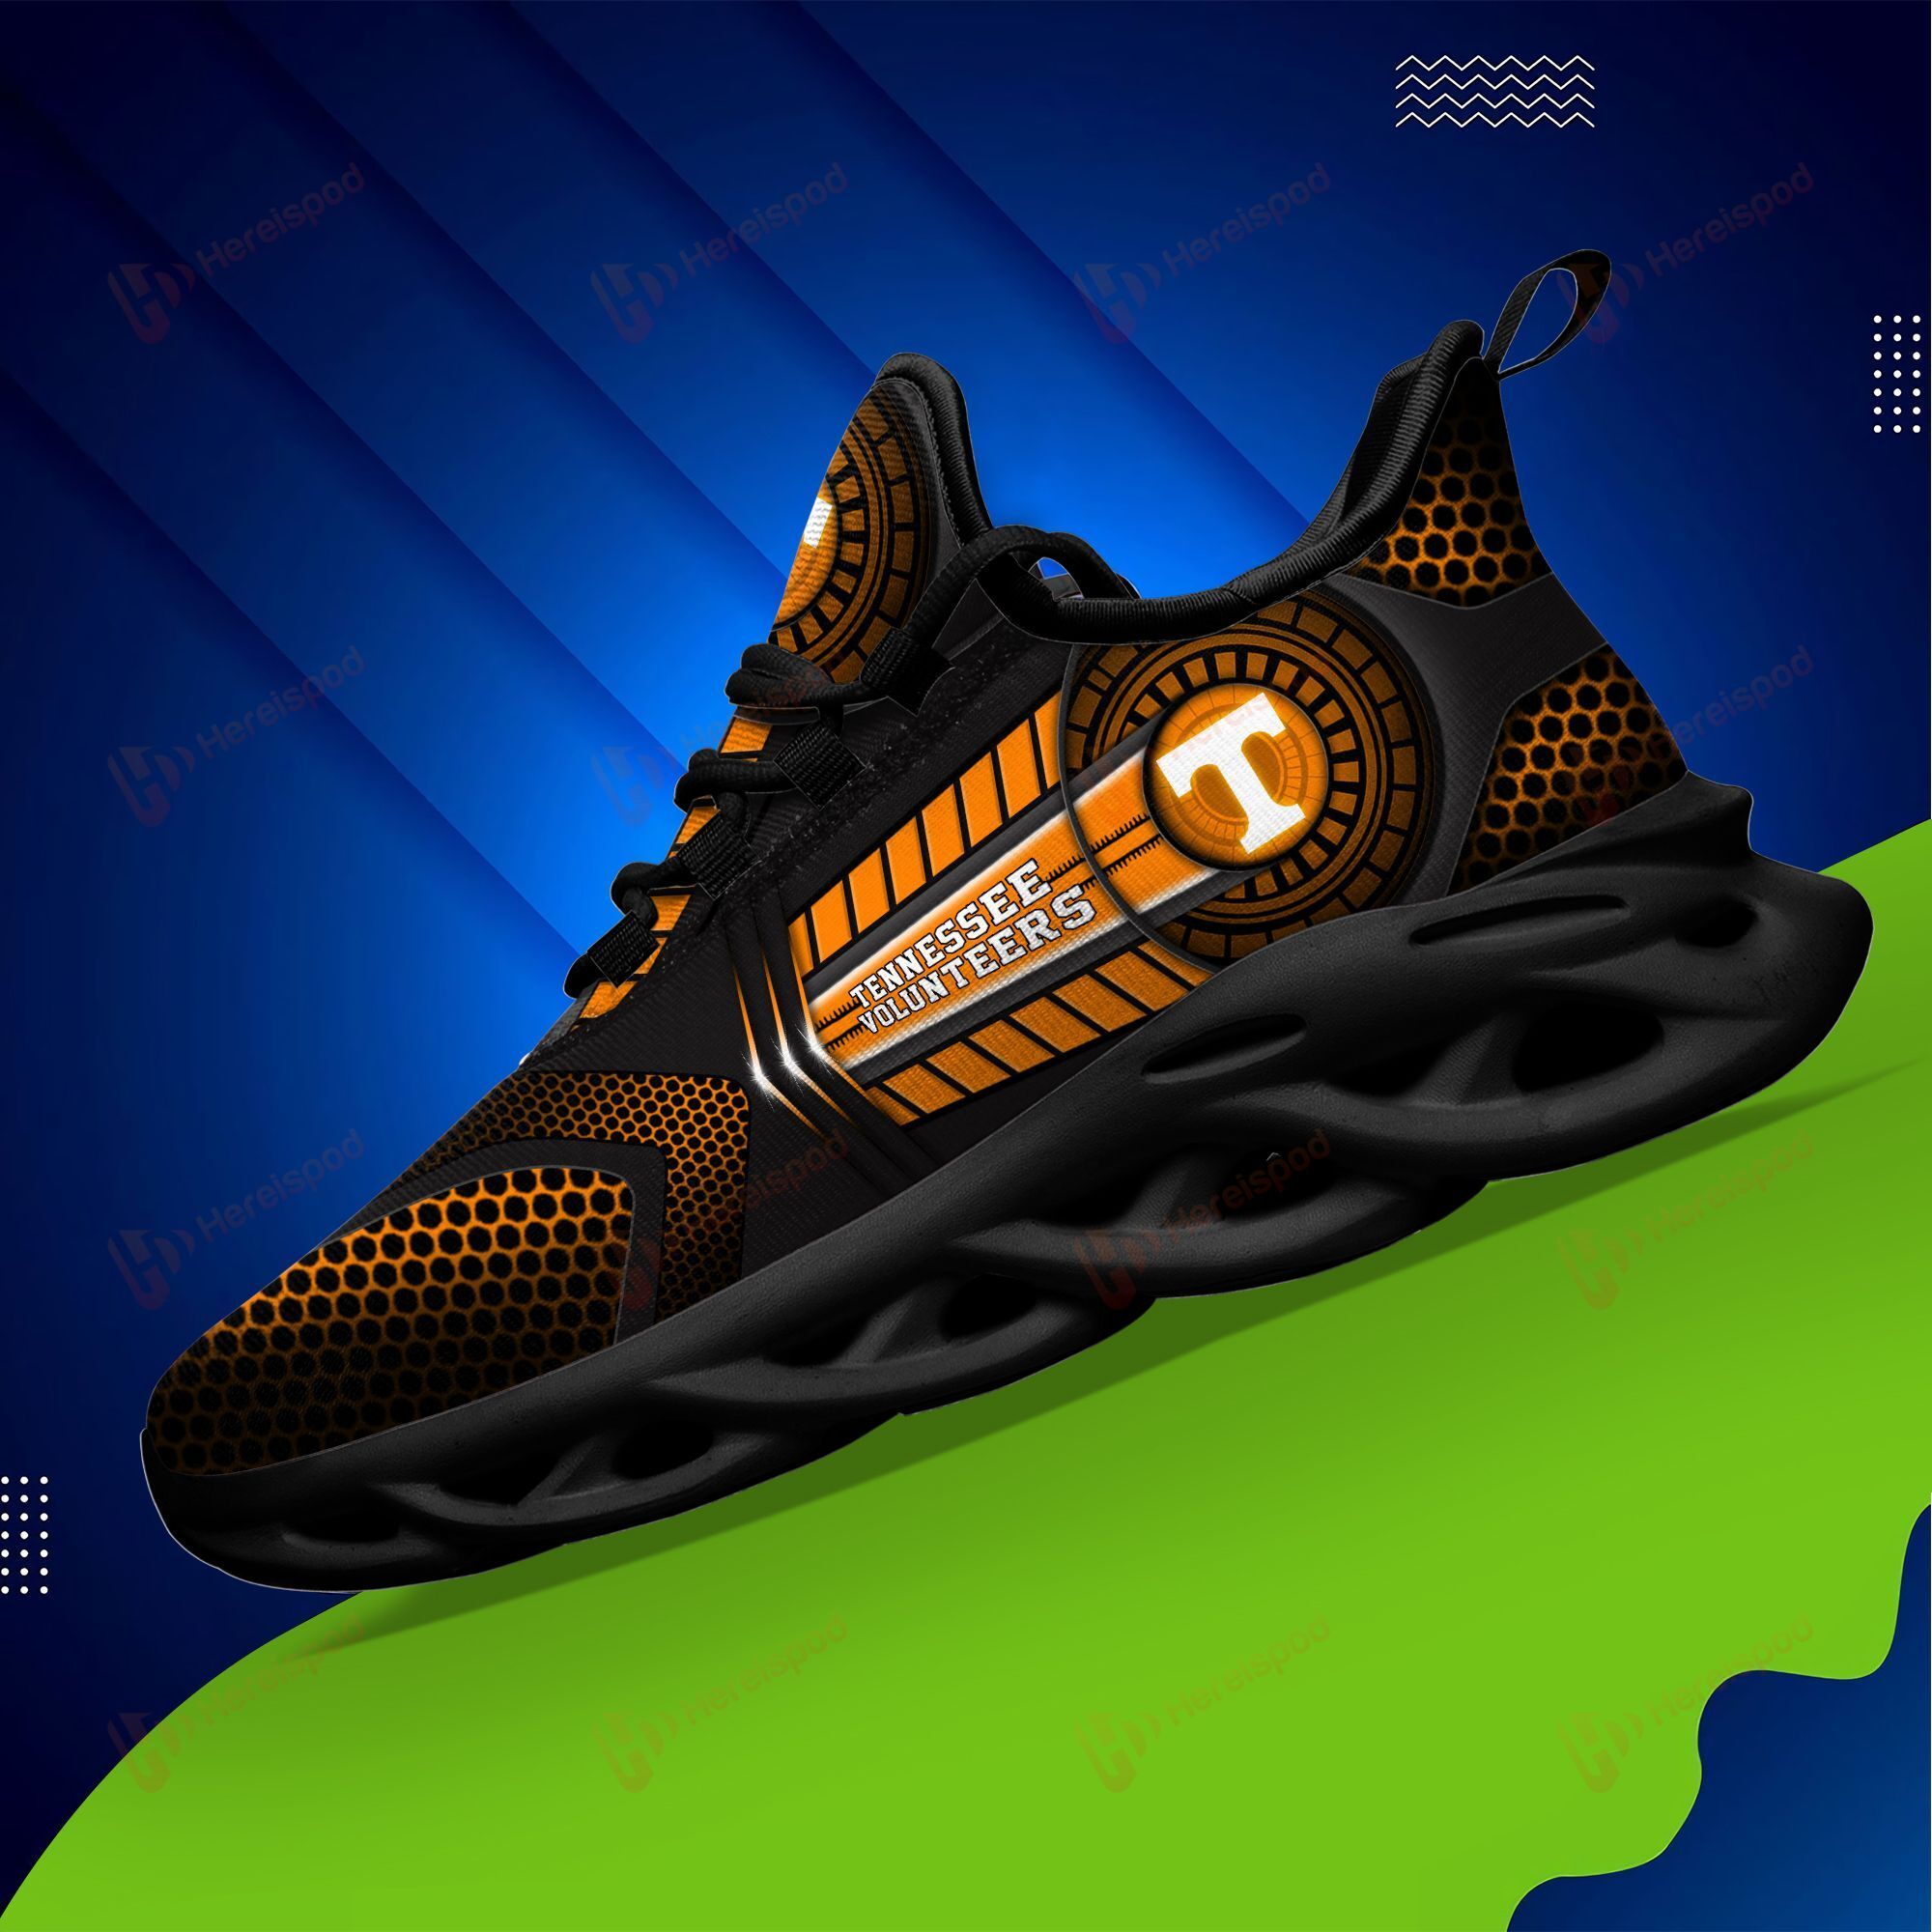 Tennessee volunteers clunky max soul shoes 2